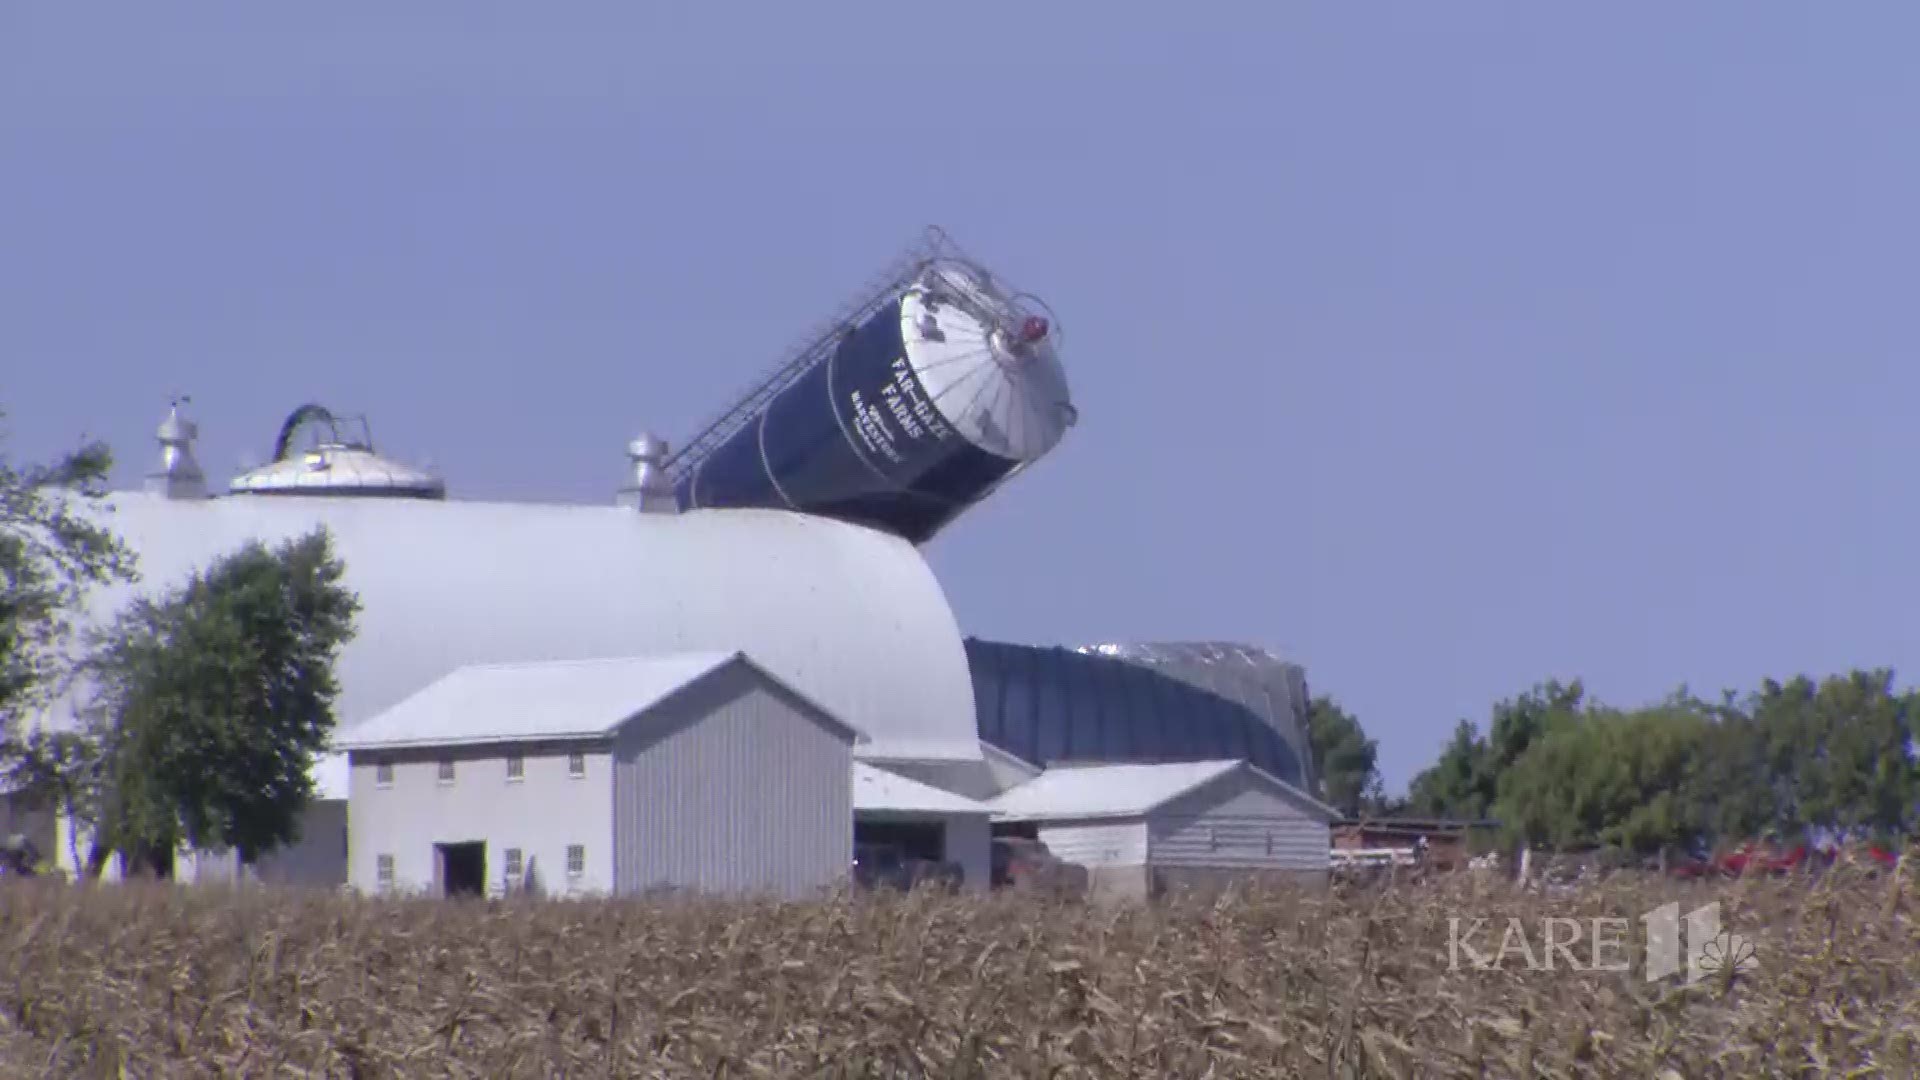 Red Barn Farm in Northfield, Minnesota was hit with extensive storm damage on Thursday night. NWS storm survey teams are still trying to determine whether a tornado touched down in that area. https://kare11.tv/2OJulBa